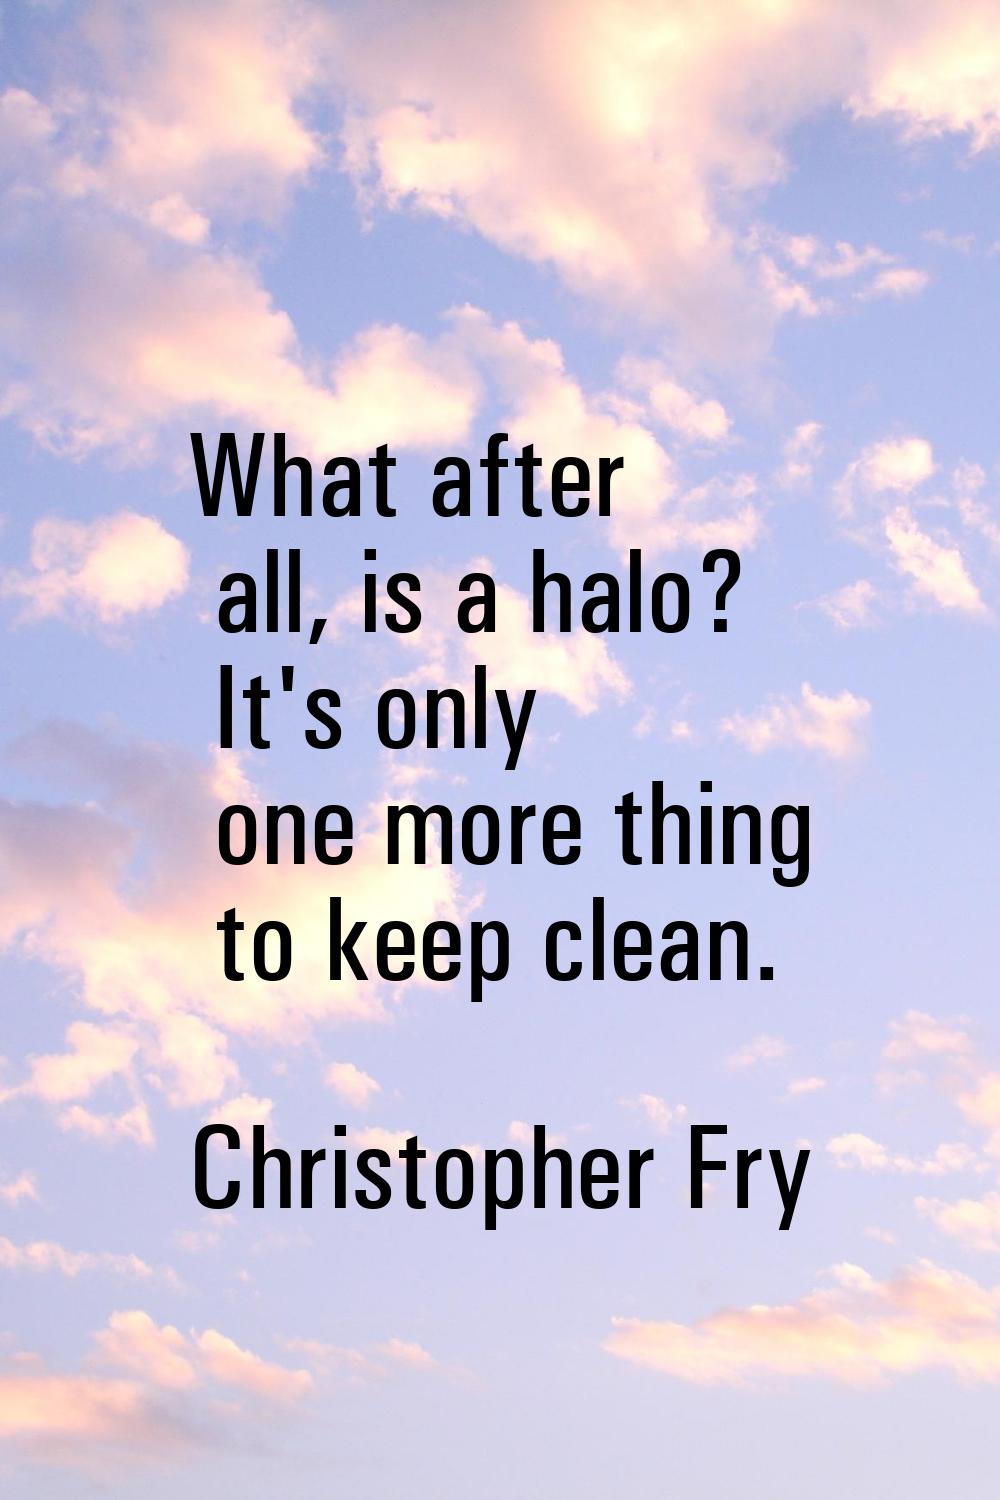 What after all, is a halo? It's only one more thing to keep clean.